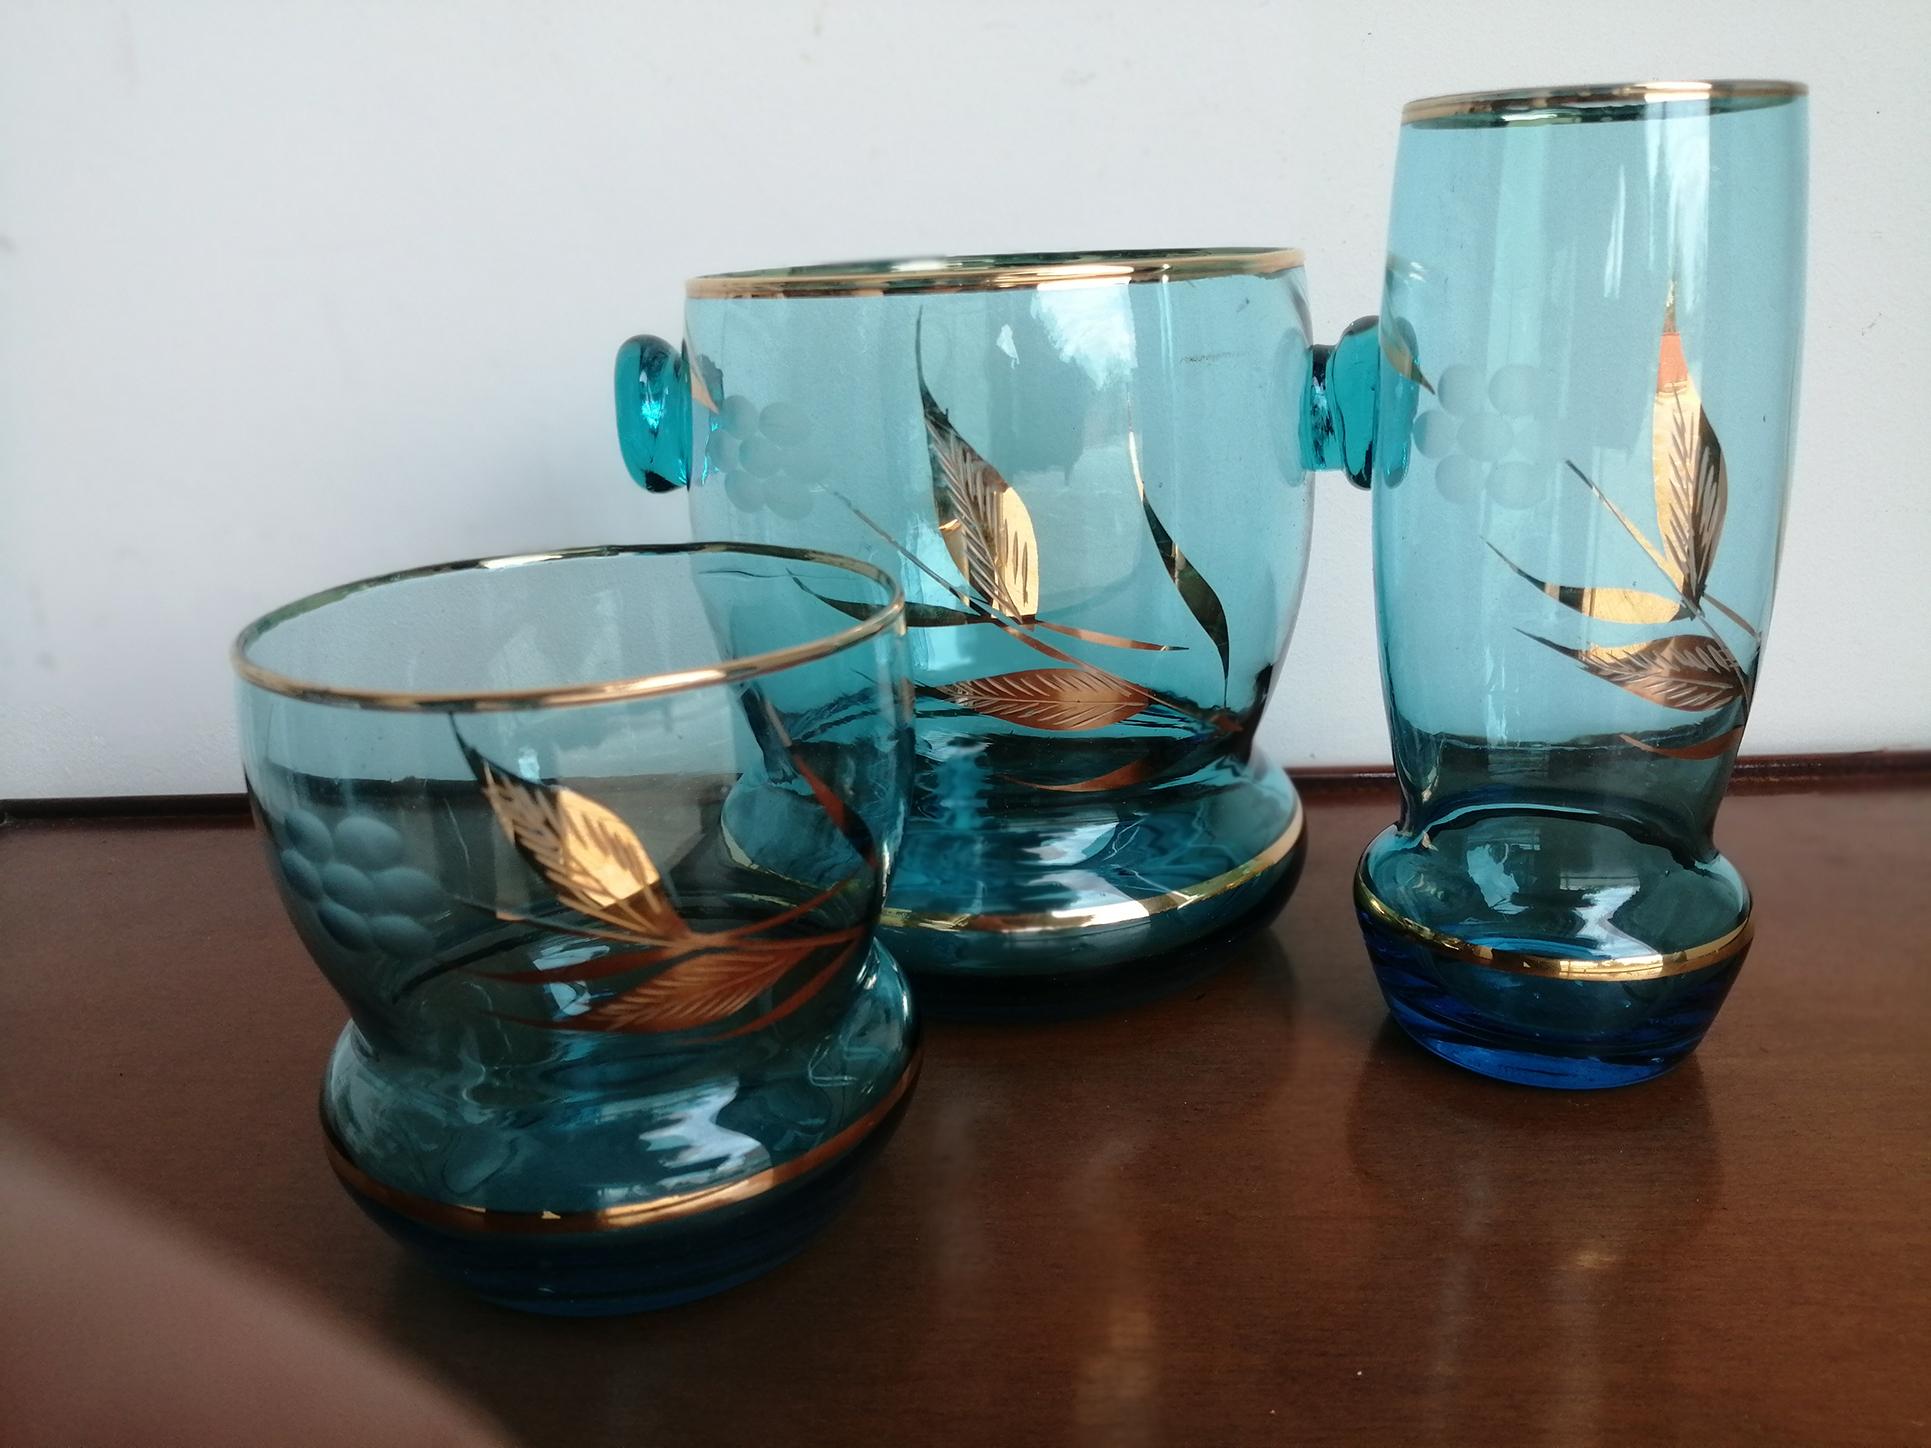 Spectacular colour. A beautiful blue -The photos do not do it justice

Set of 13 glasses and vintage  crystal and glass ice bucket

Blue crystal with gold bands and hand painted and carved floral design.

#Bohemiaglass #blueglass #tabesstyle